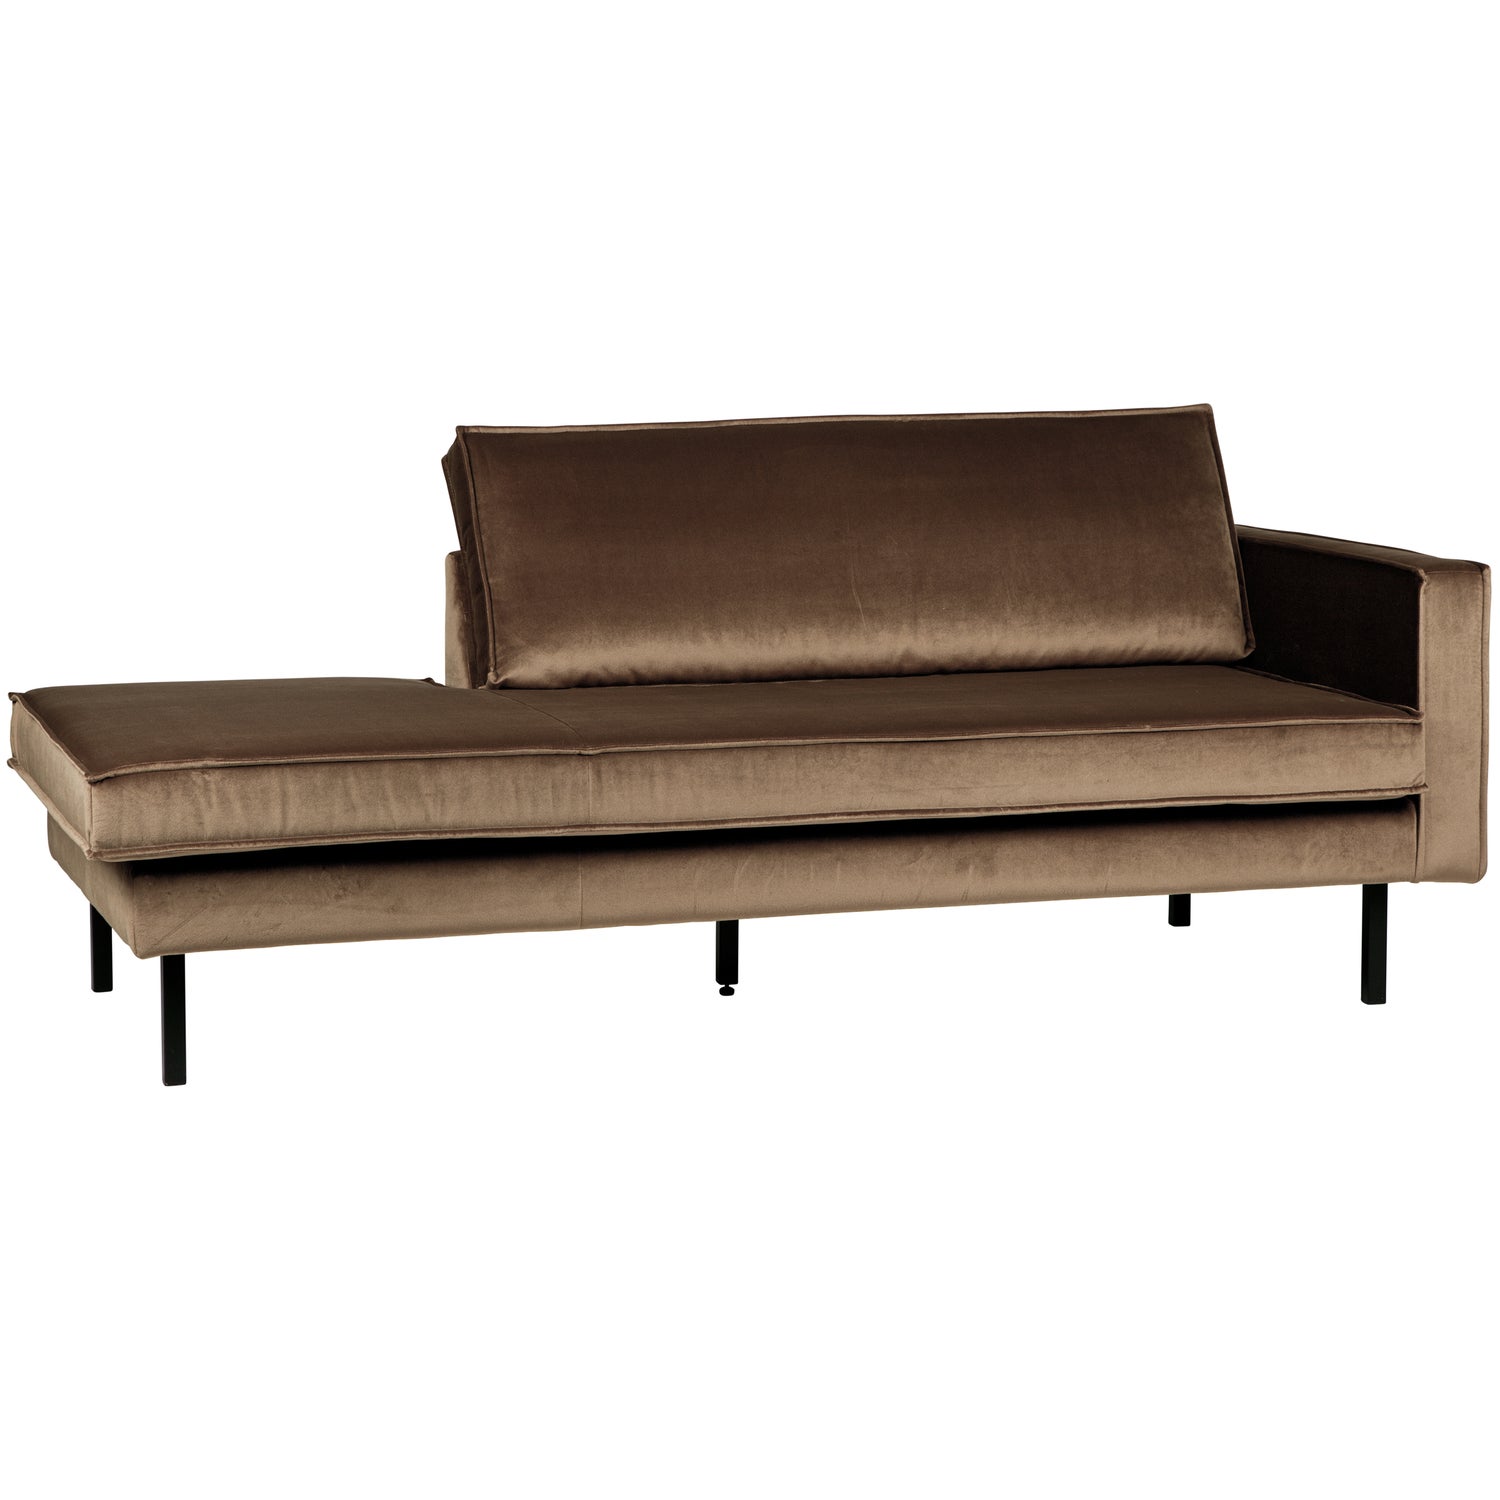 800746-12-02_VS_BP_Rodeo_daybed_right_taupe.jpg?auto=webp&format=png&width=2000&height=2000